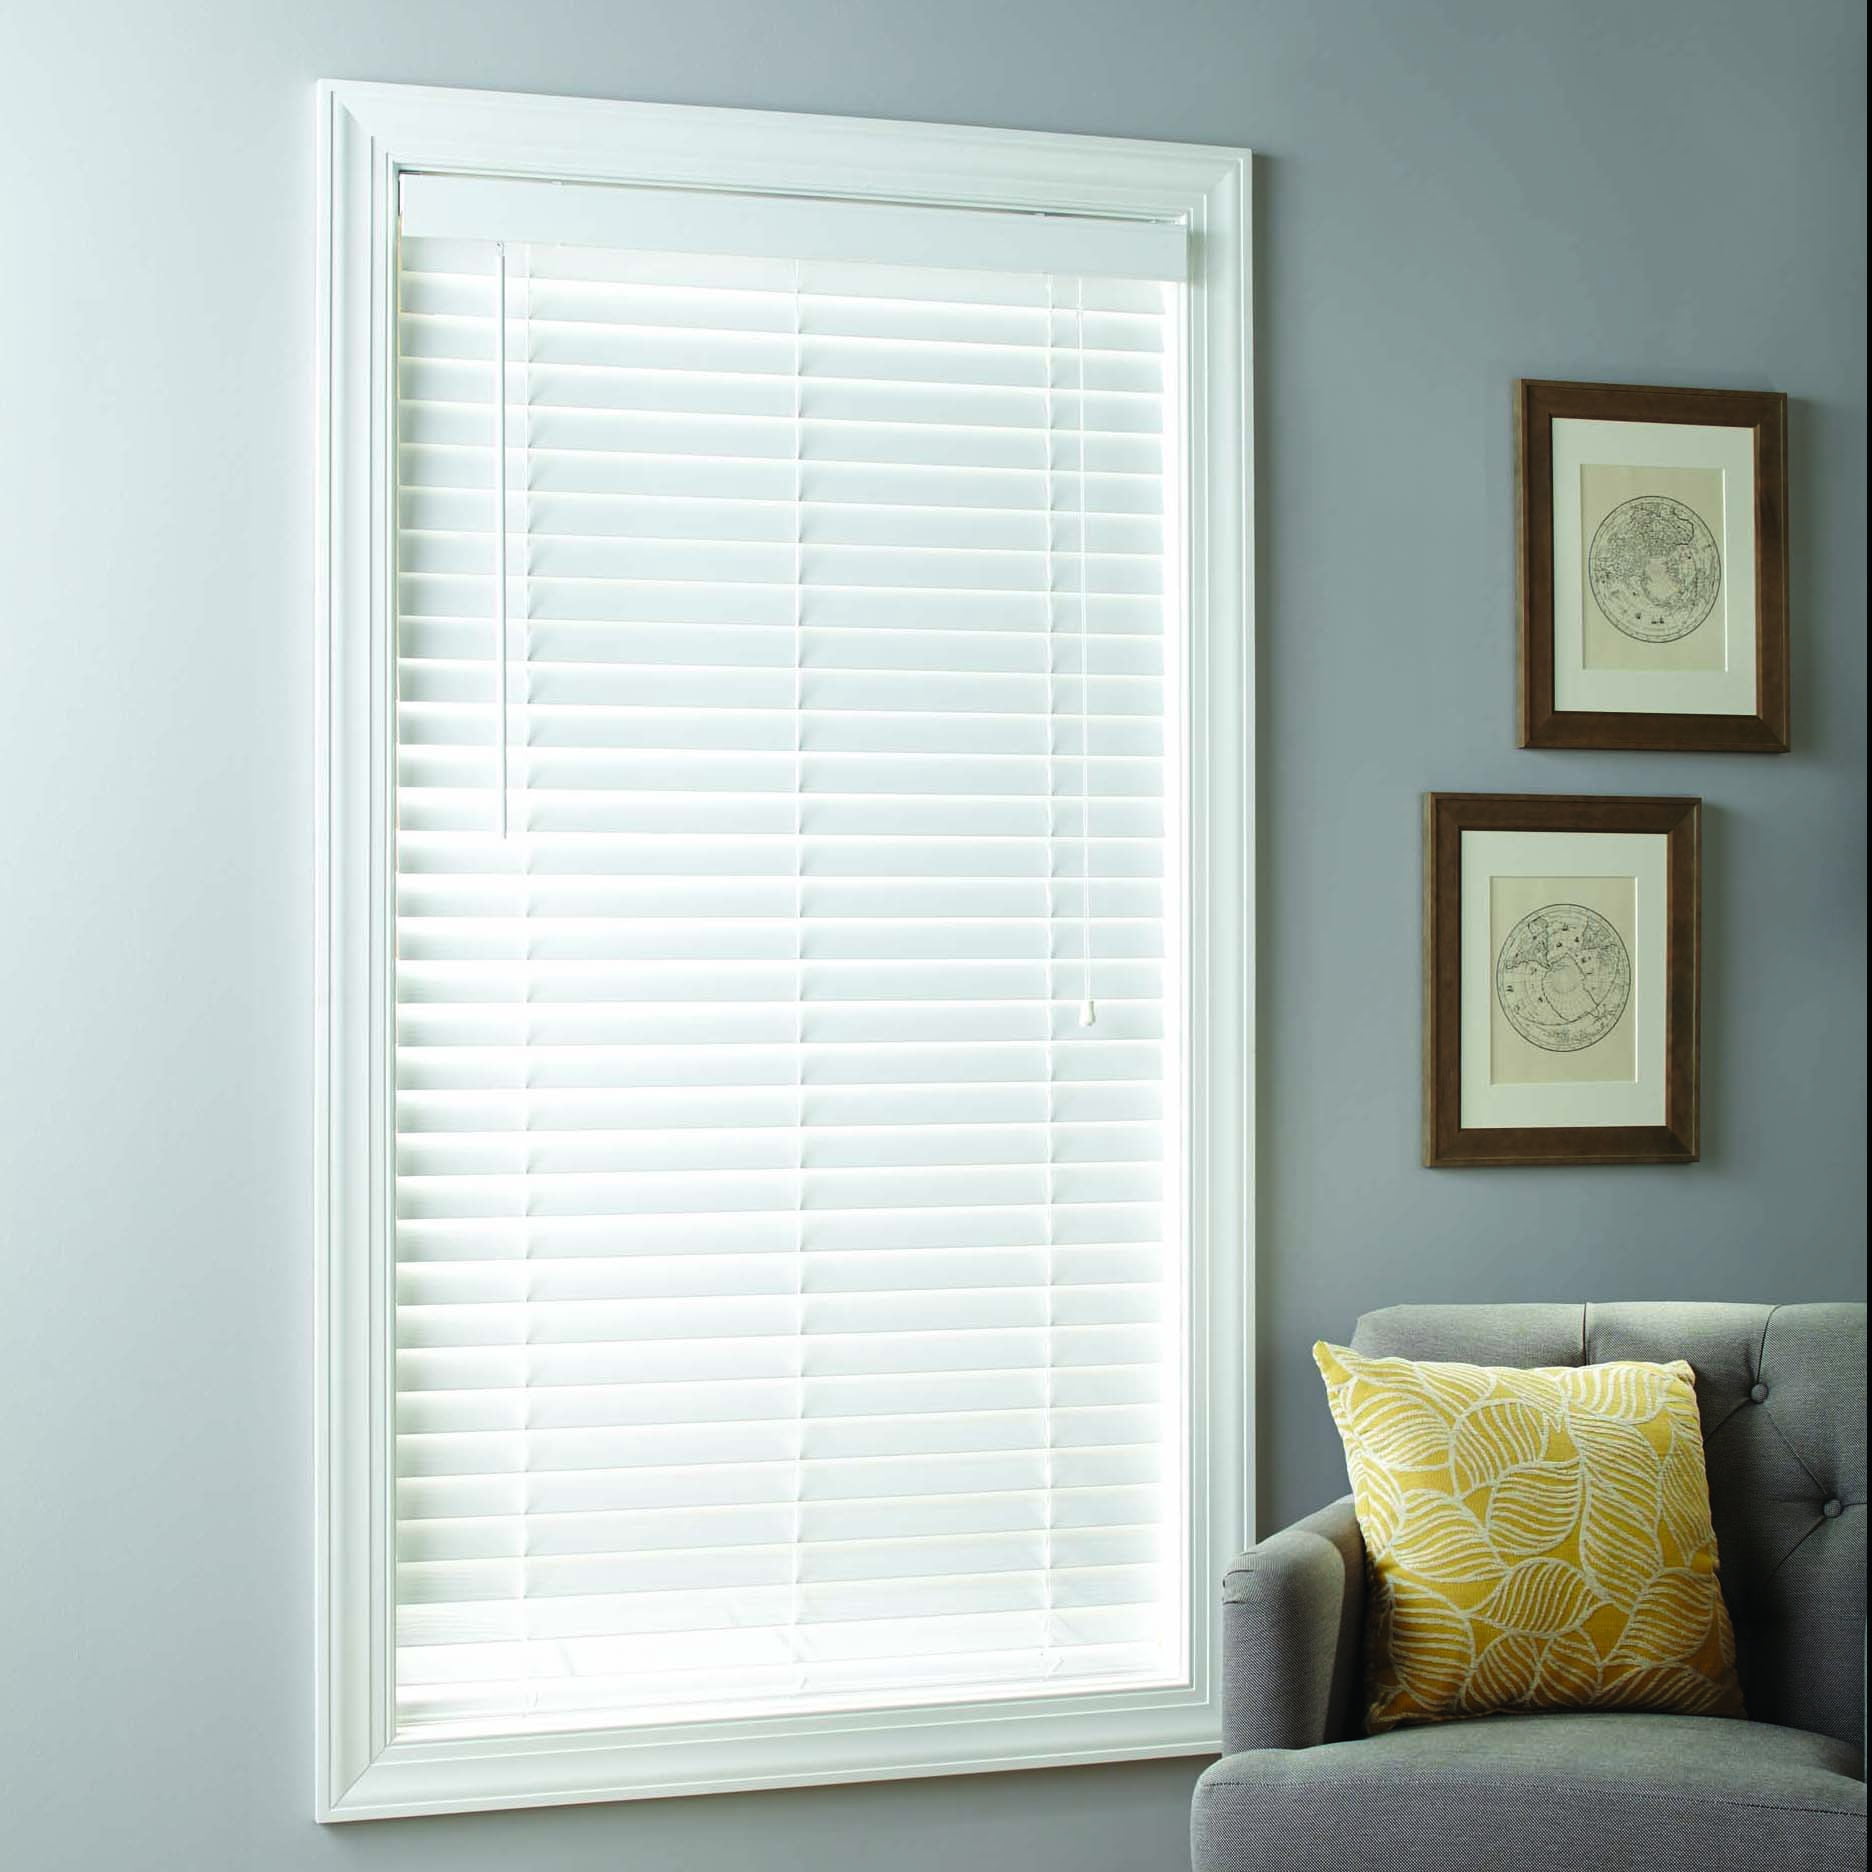 2" FAUX WOOD PREMIUM BLINDS 26" Width by 24" to 35" Length 